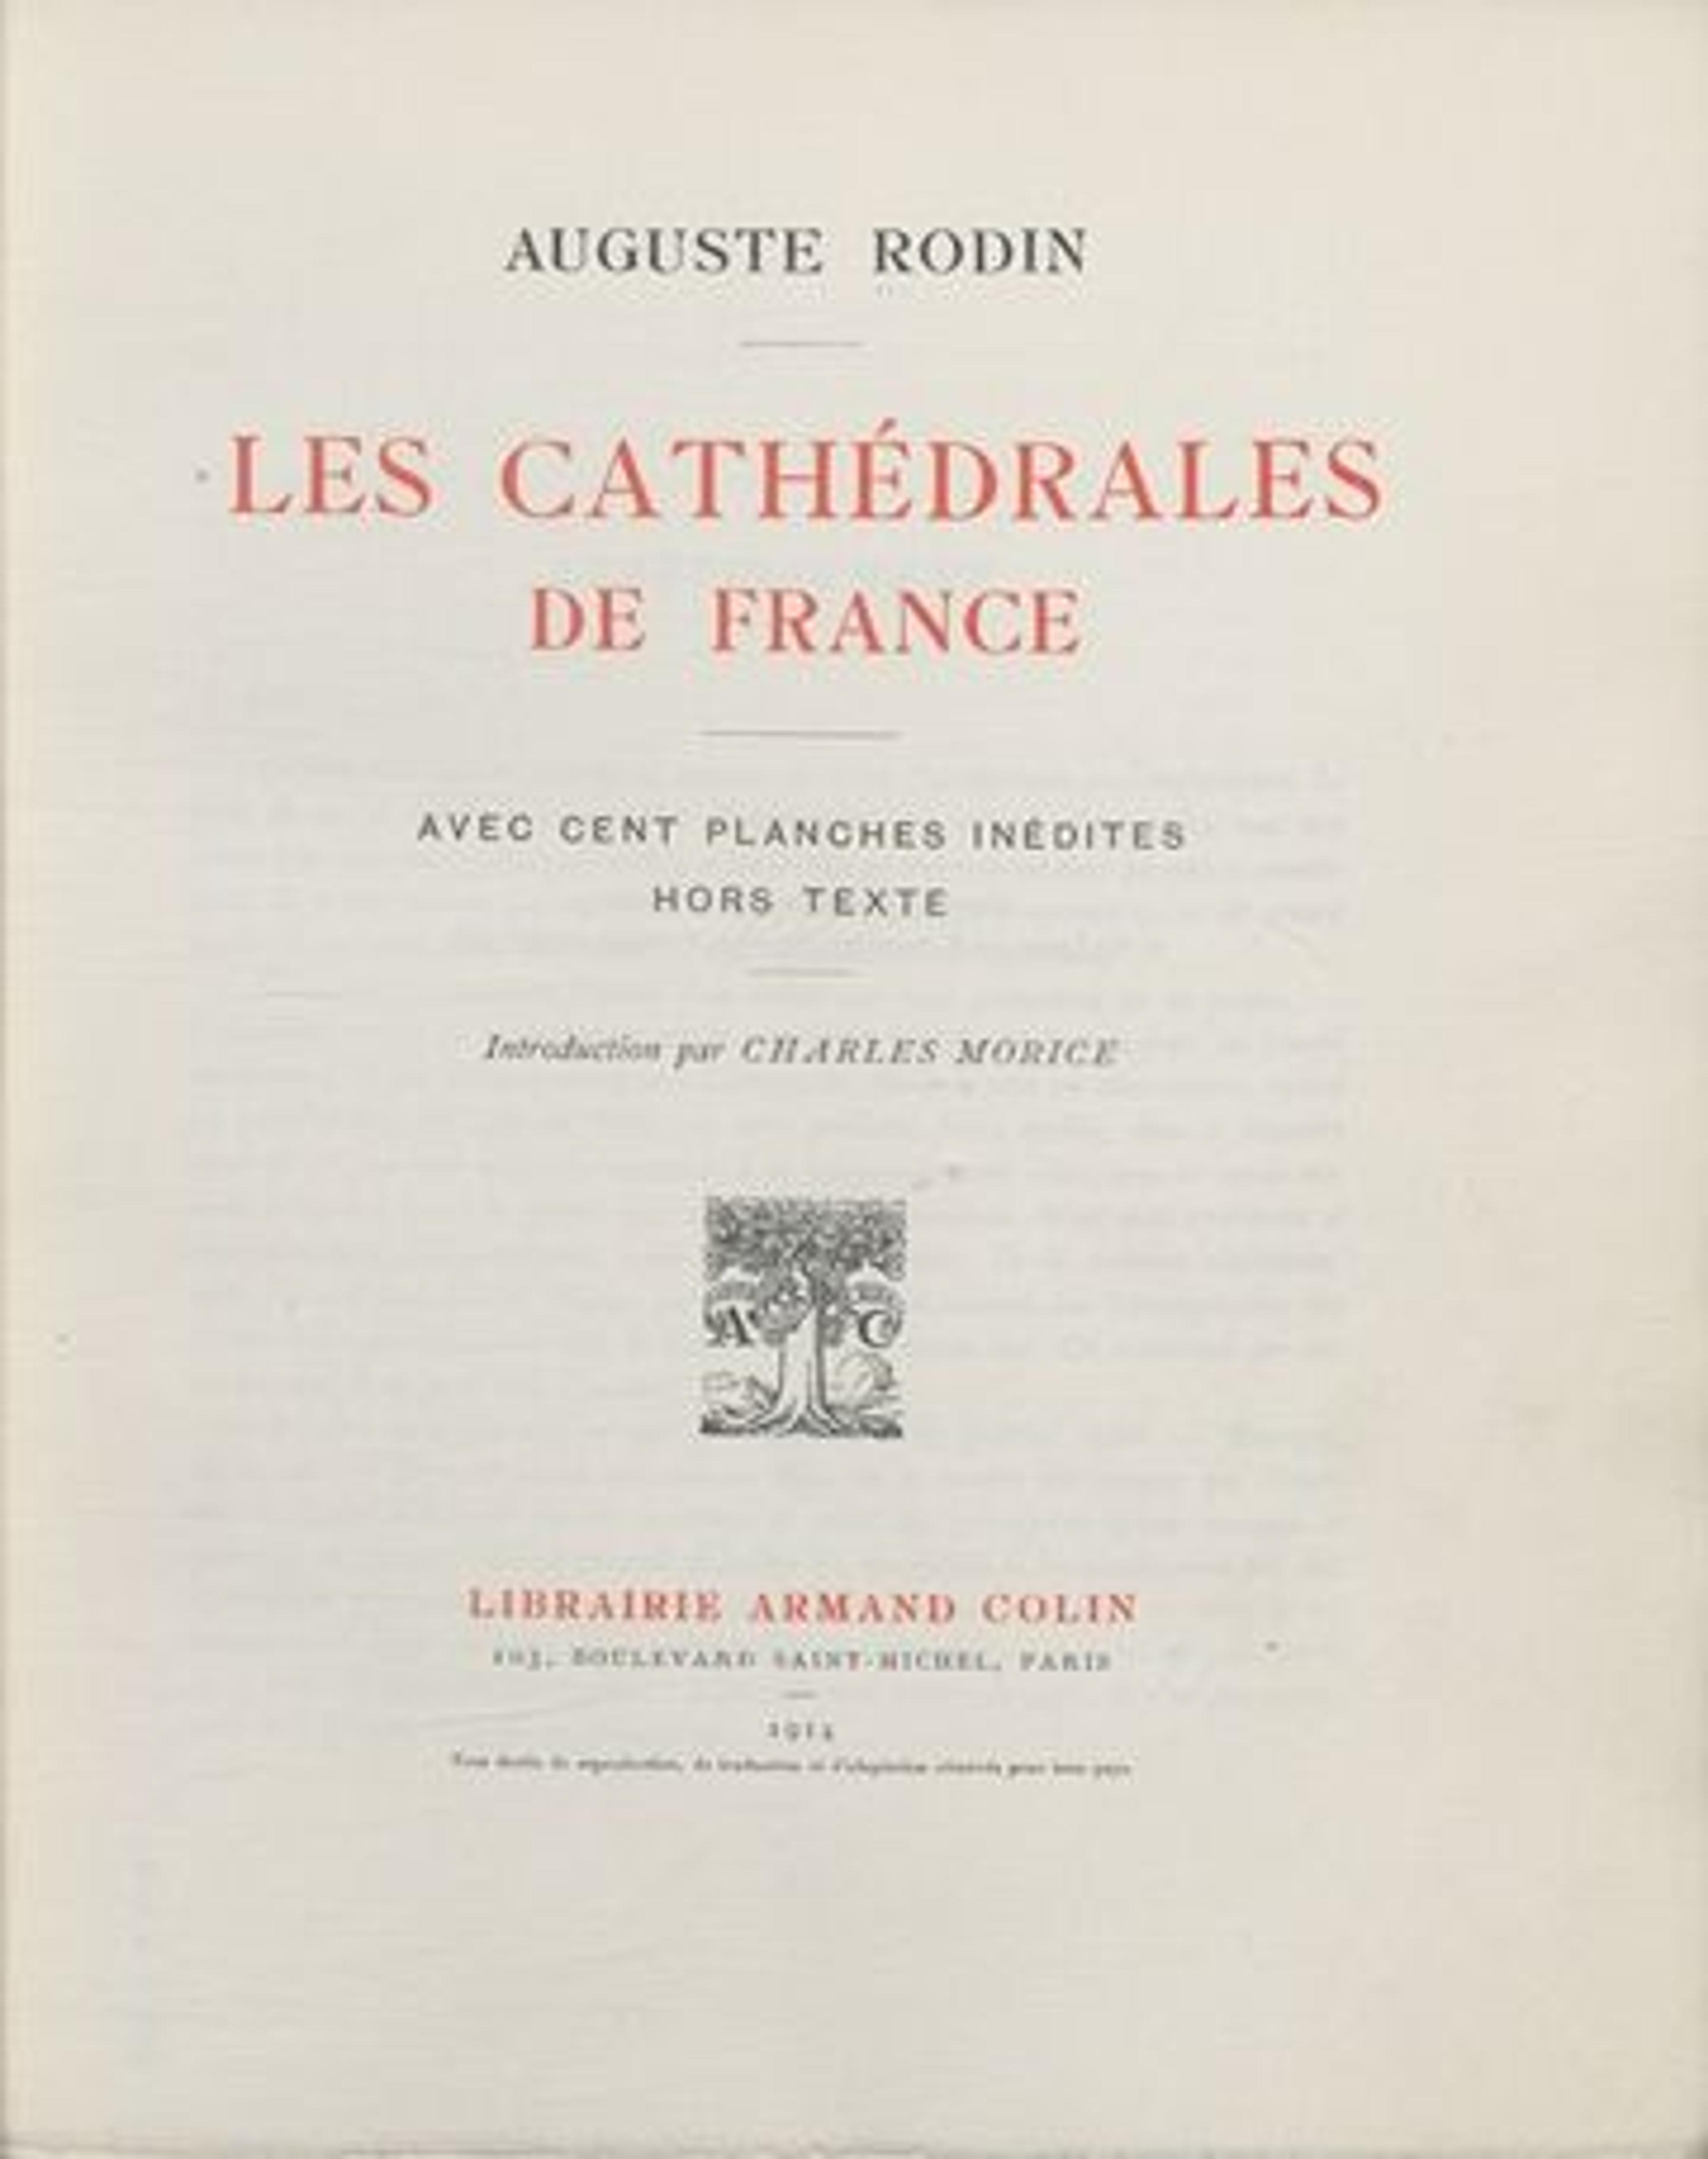 Cover of Auguste Rodin's The Cathedrals of France